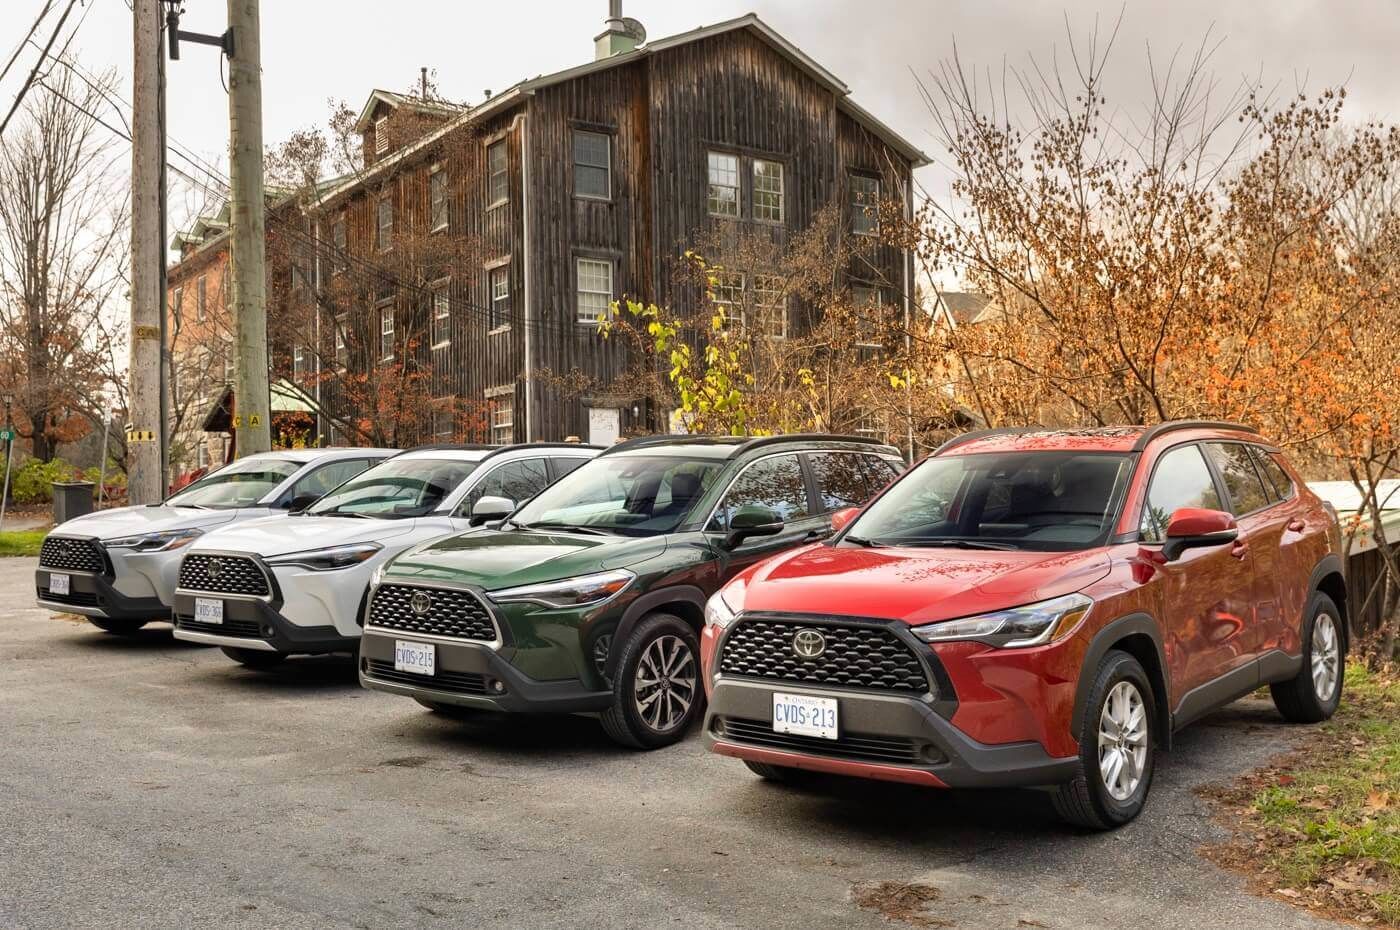 Four 2022 Toyota Corolla Cross SUVs in different colors parked in the yard of a large barn